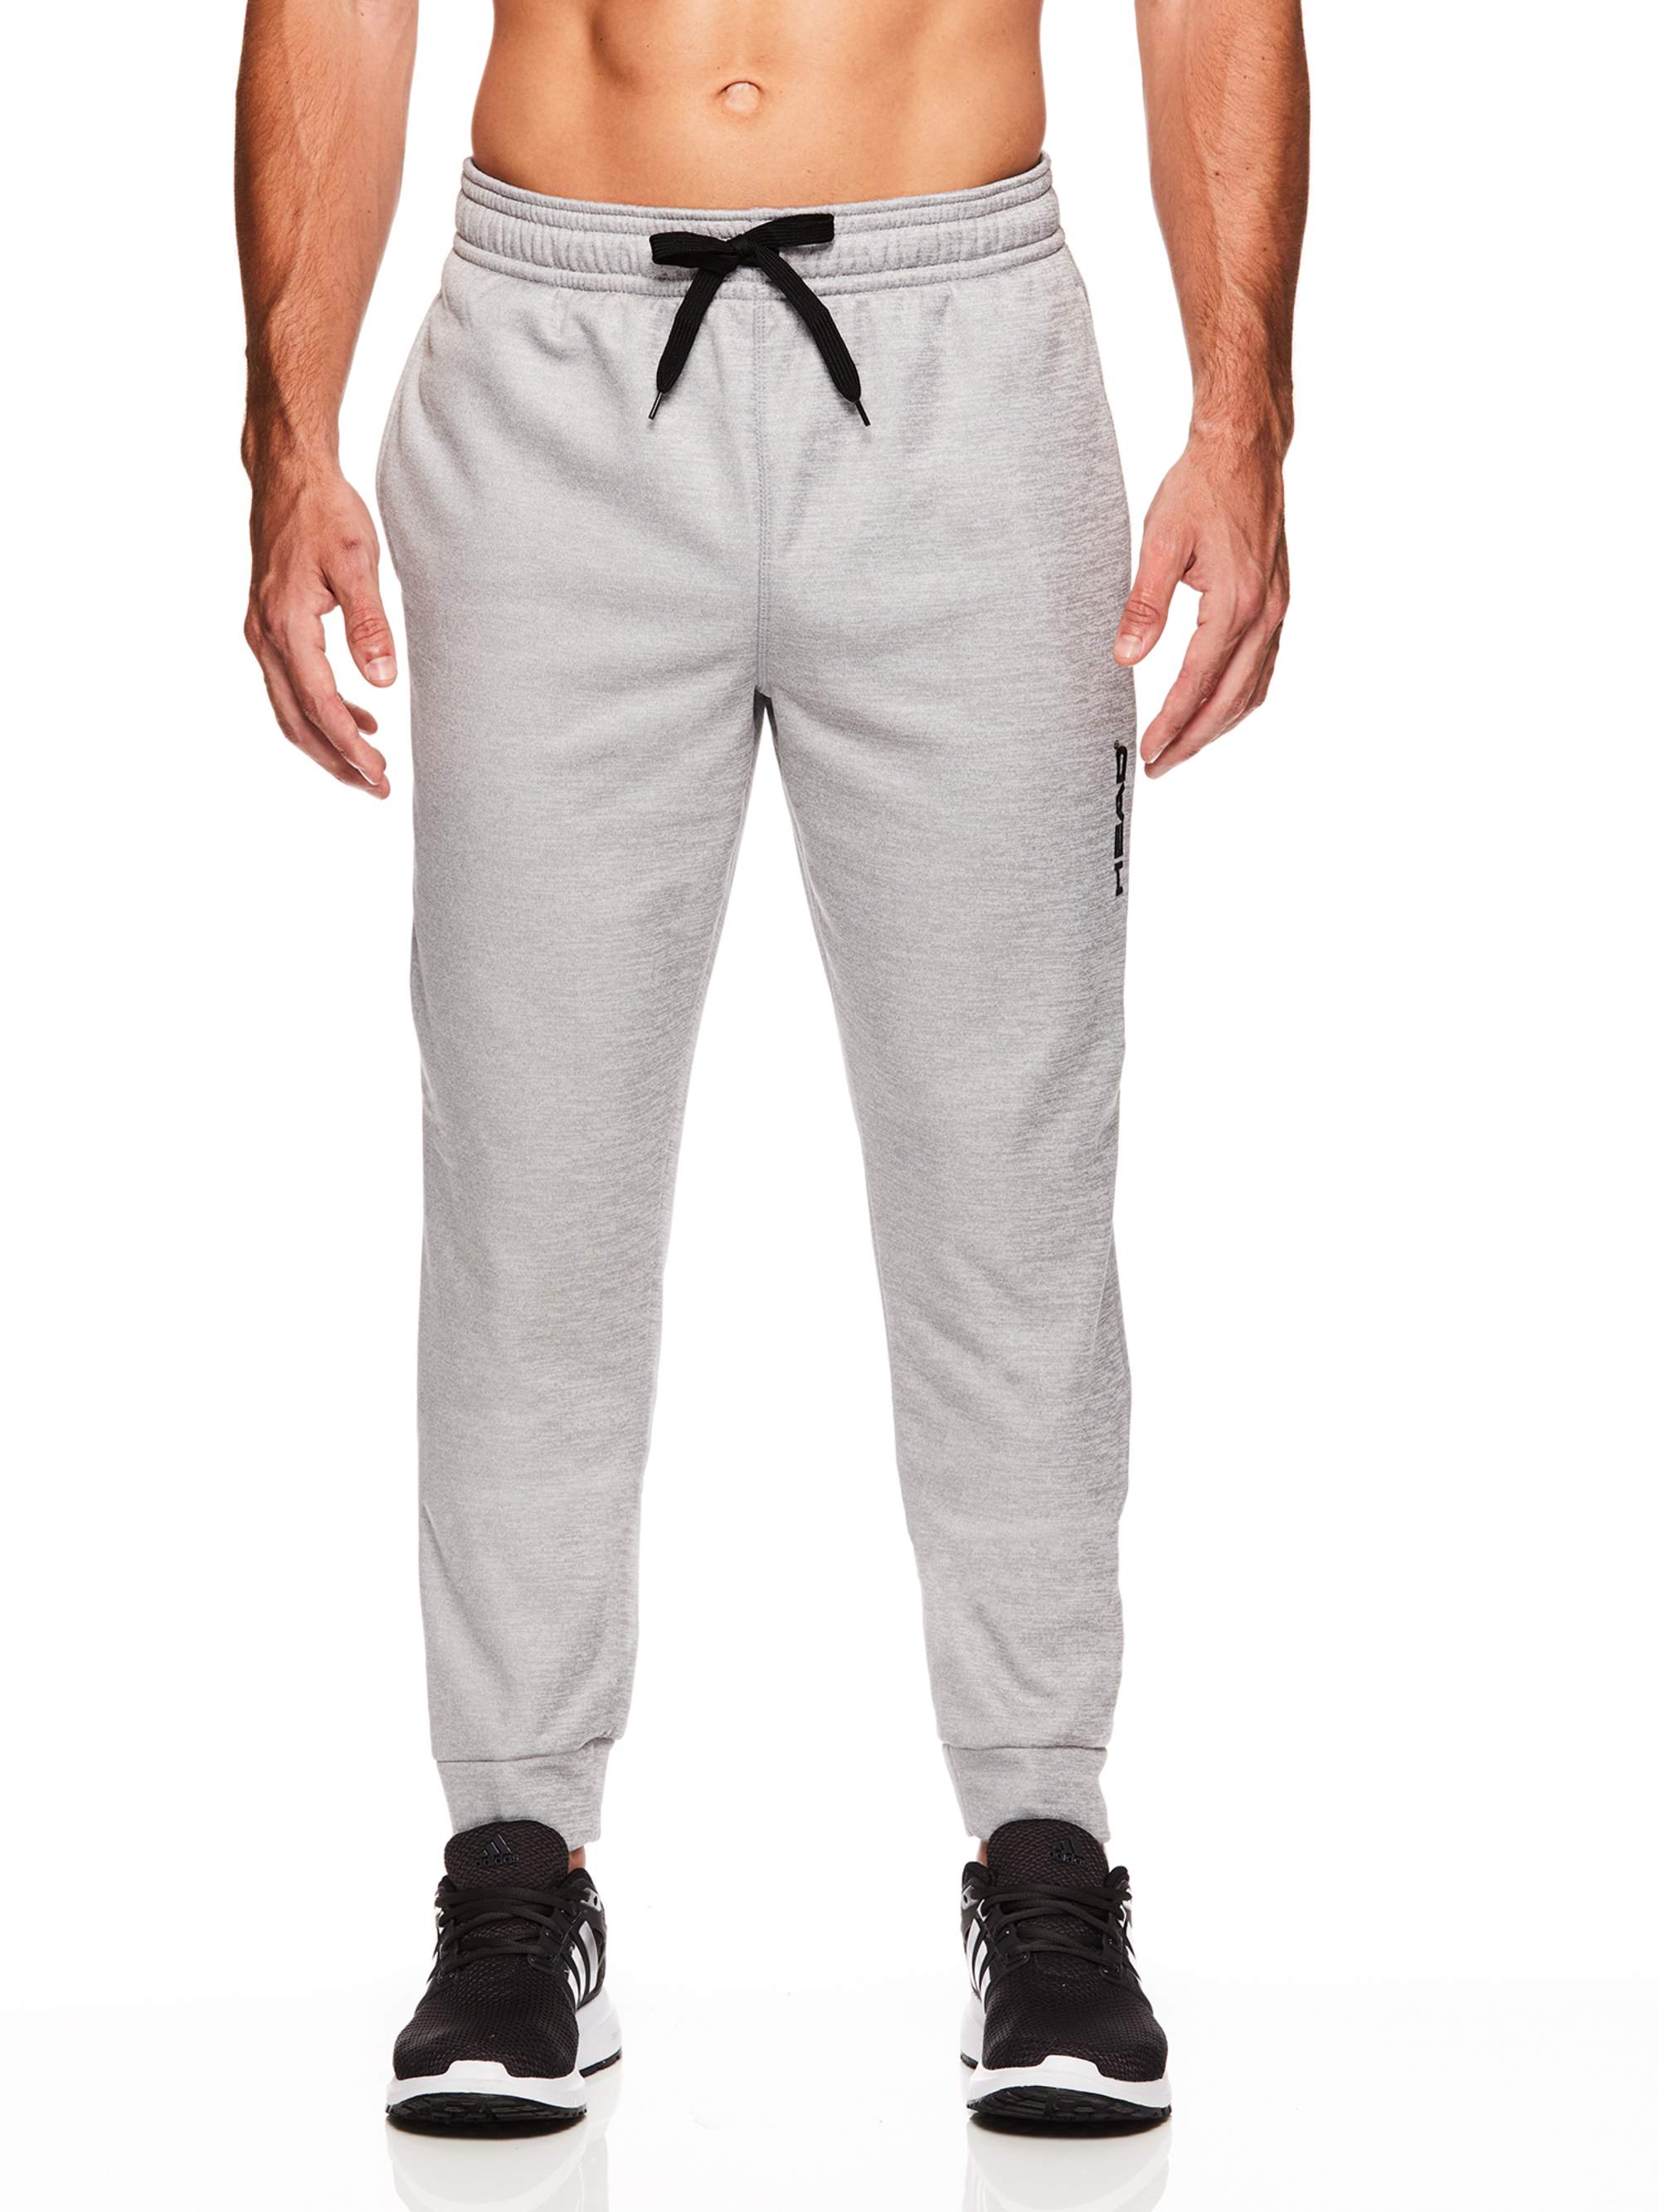 Head Men's Athletic Field Joggers - image 1 of 3